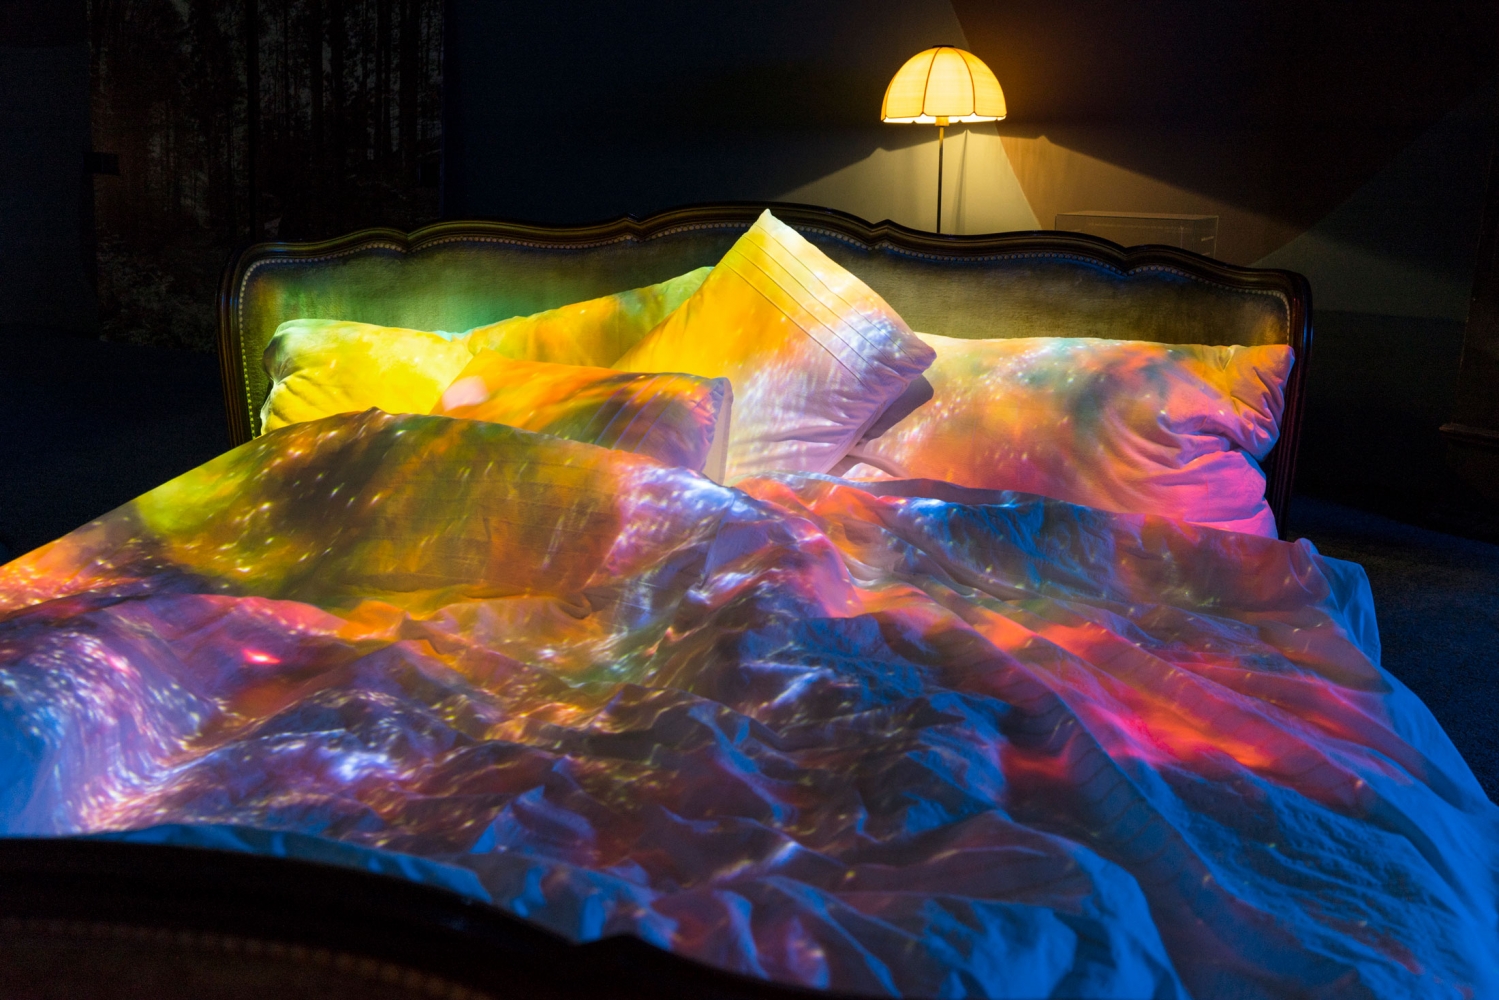 Pipilotti Rist
Tu mich nicht nochmals verlassen (Do Not Abandon Me Again), 2015
Single-channel video installation, silent, color, with bed
Duration: 3 minutes, 37 seconds
Dimensions variable